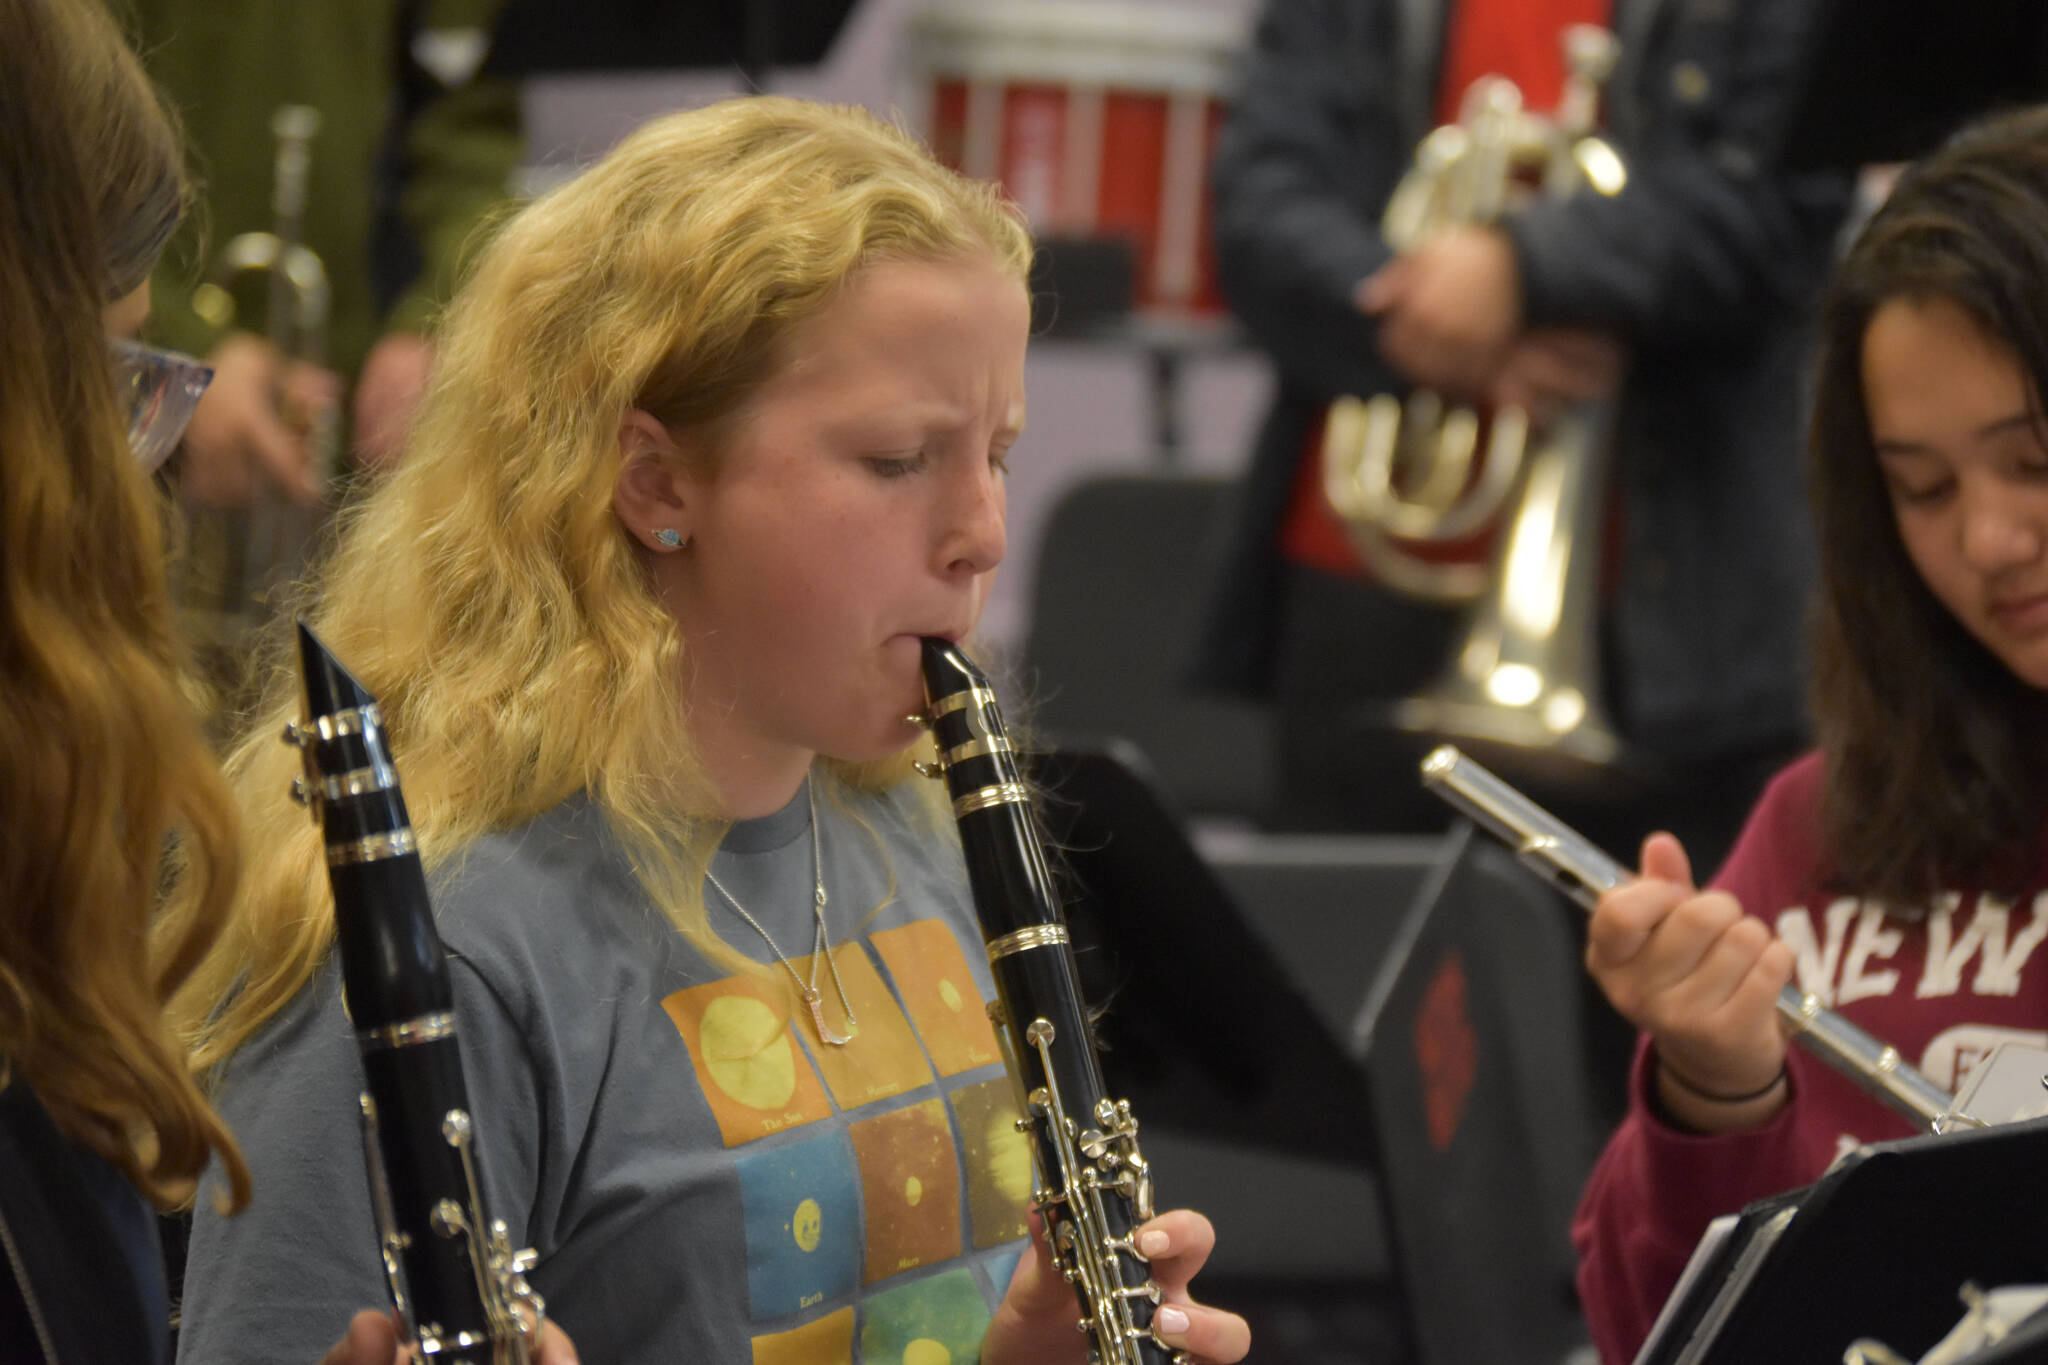 Lexi Somers, clarinet player, hits a tuning note during a KCHS Marching Band practice on Aug. 18, 2022, in Kenai, Alaska. (Jake Dye/Peninsula Clarion)